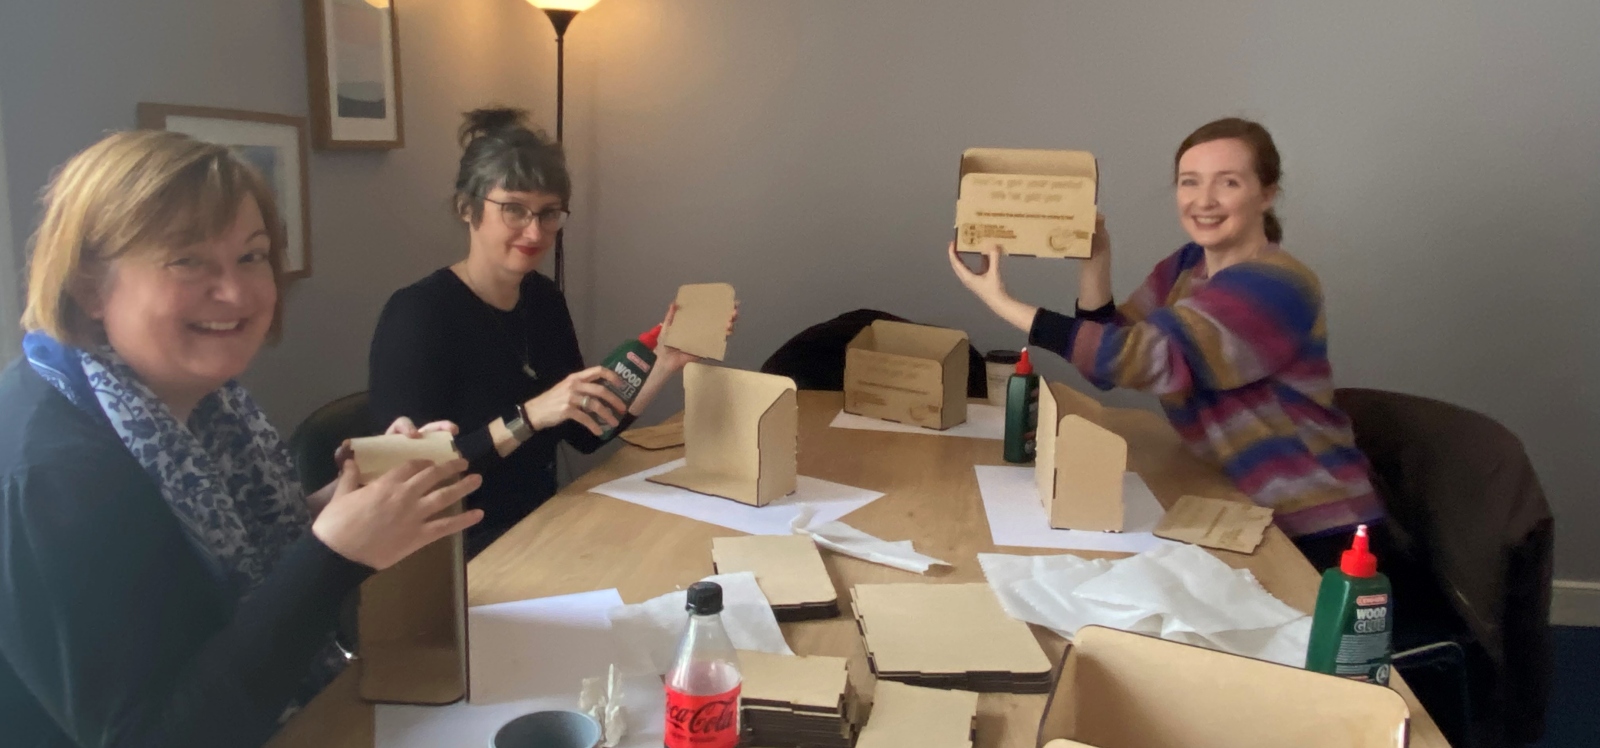 Three women at a table making boxes